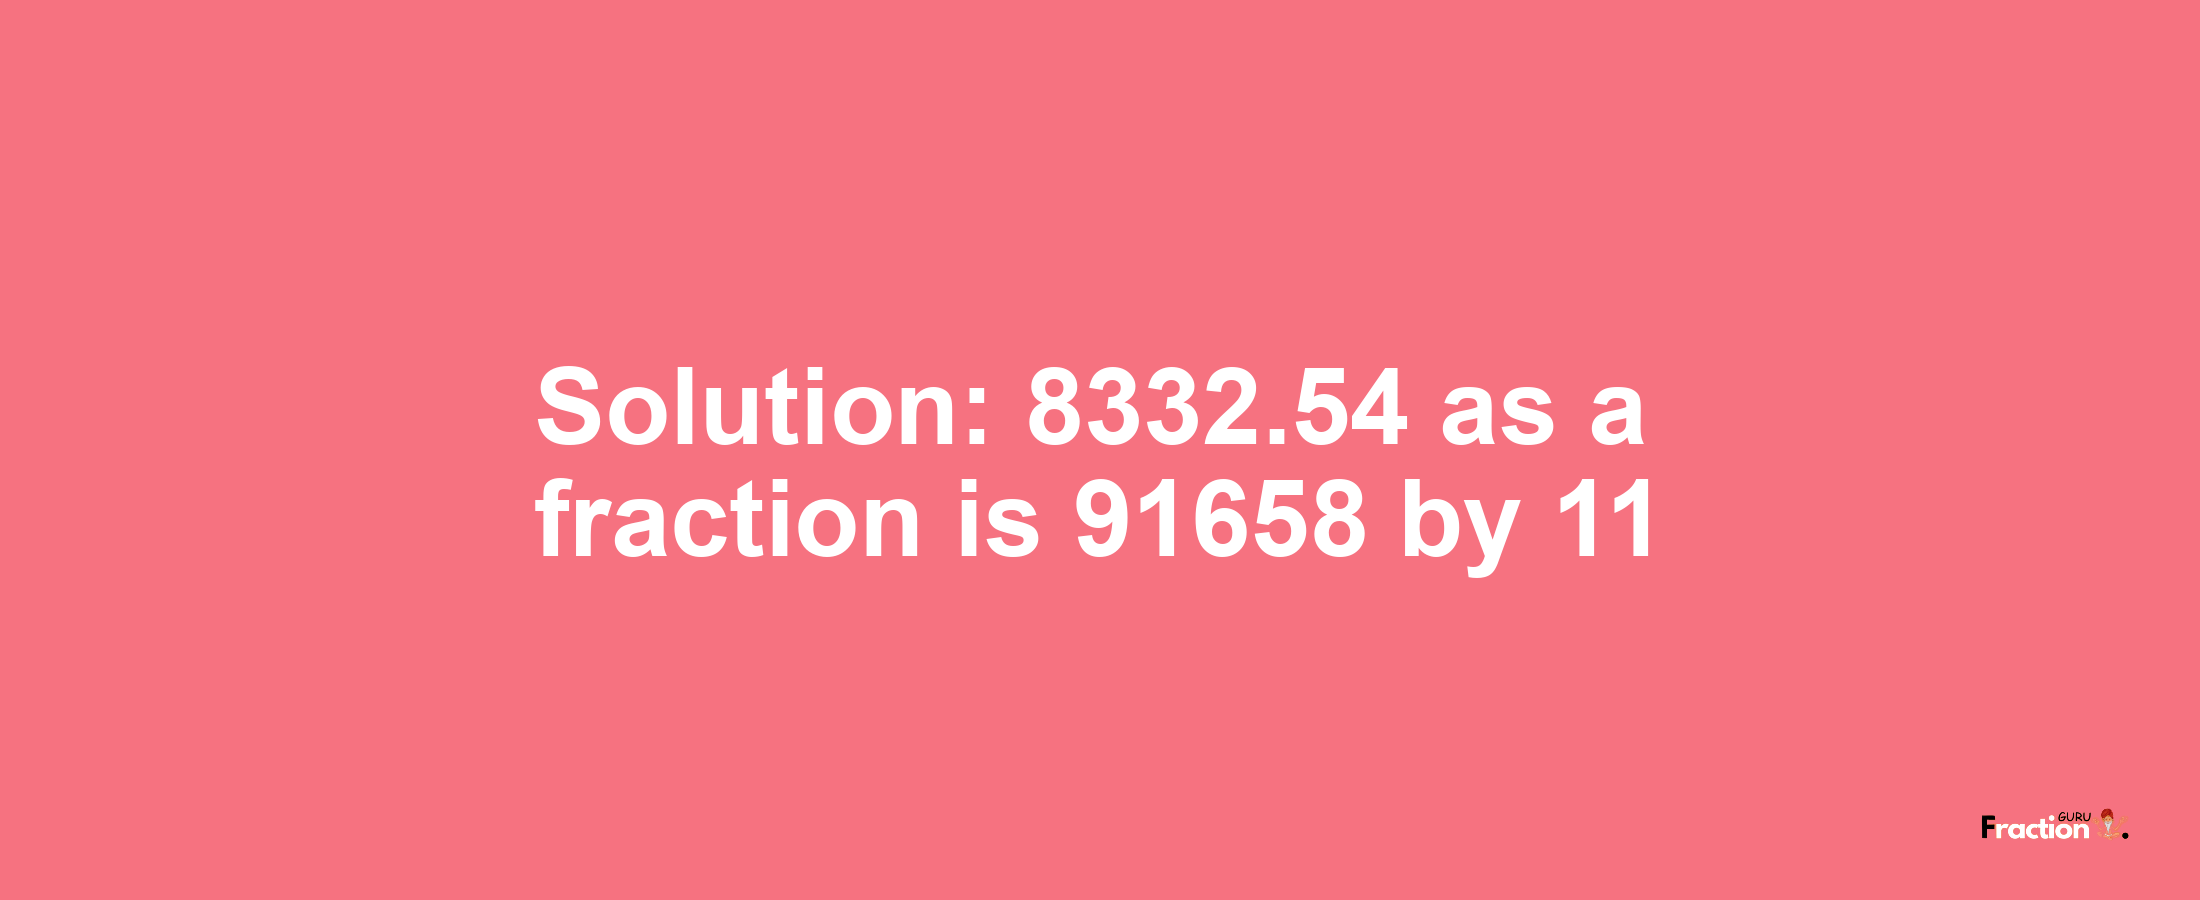 Solution:8332.54 as a fraction is 91658/11